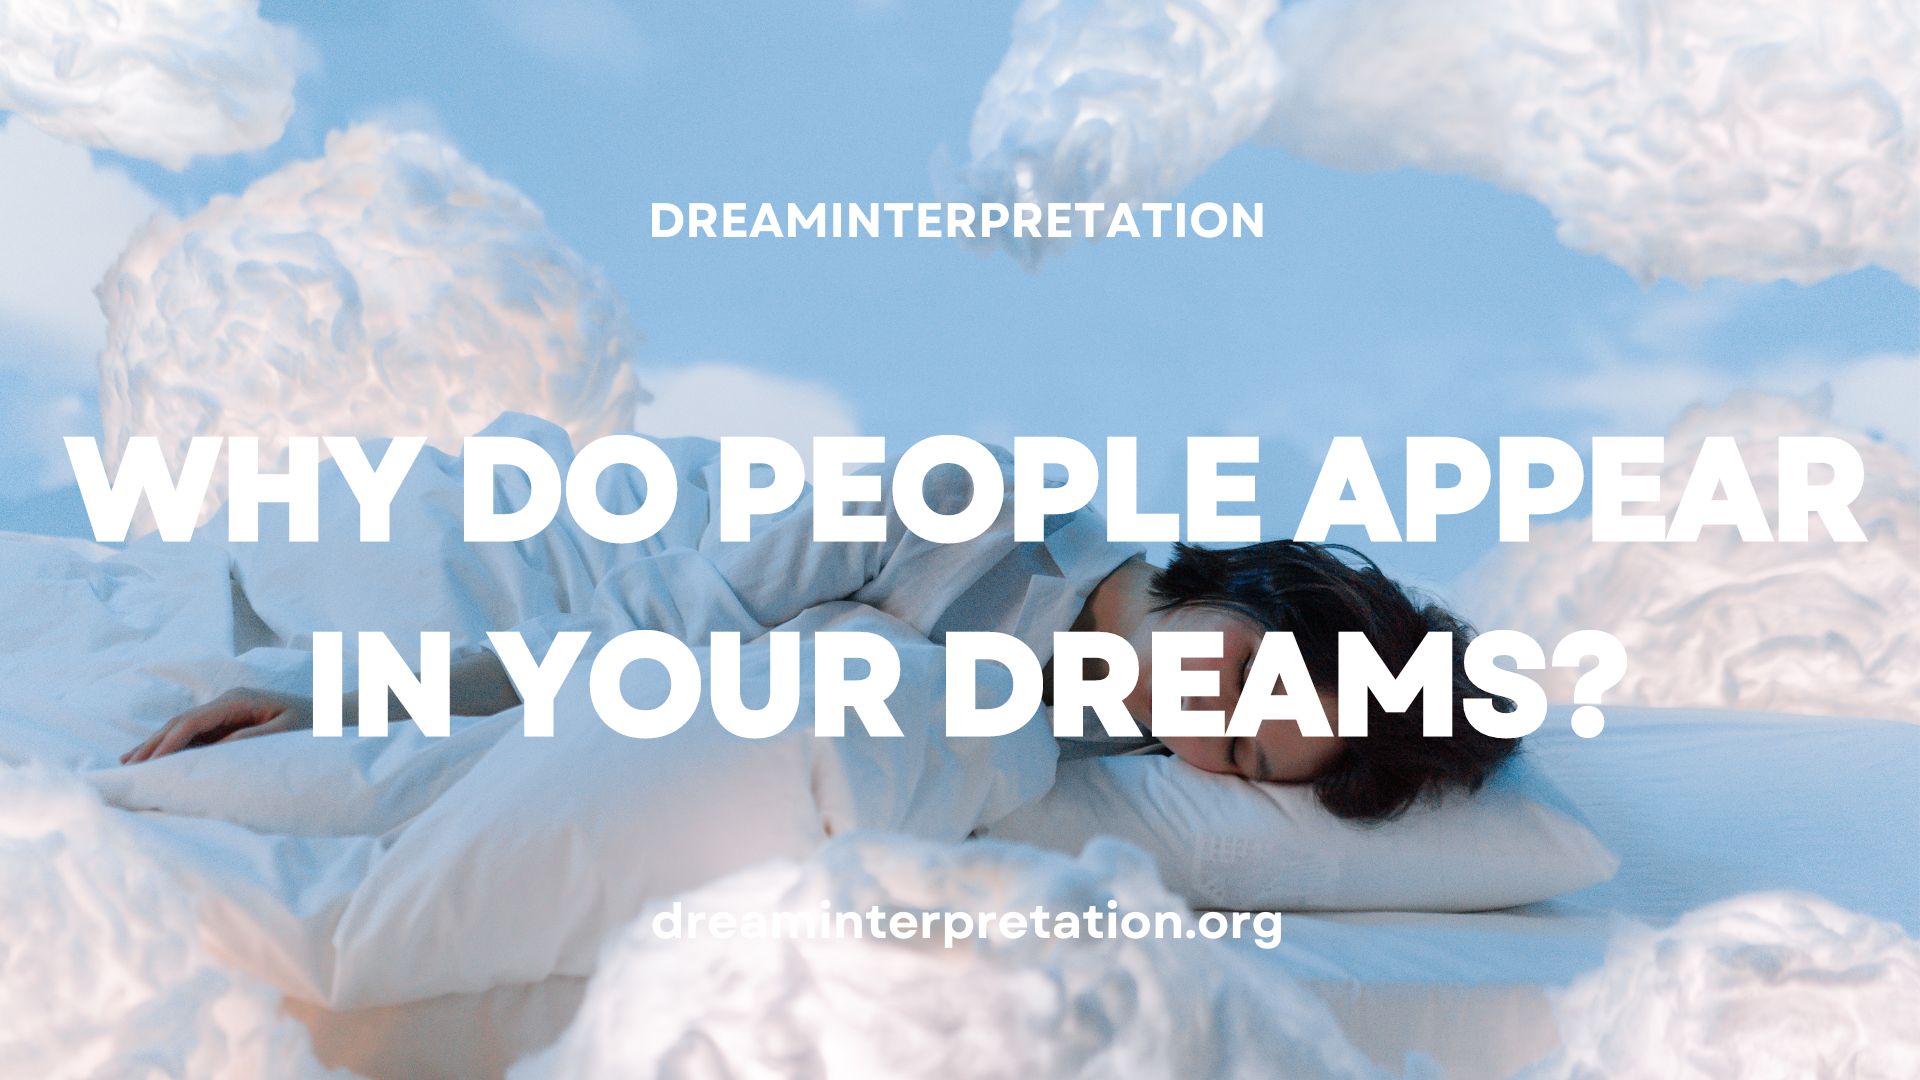 Why Do People Appear In Your Dreams